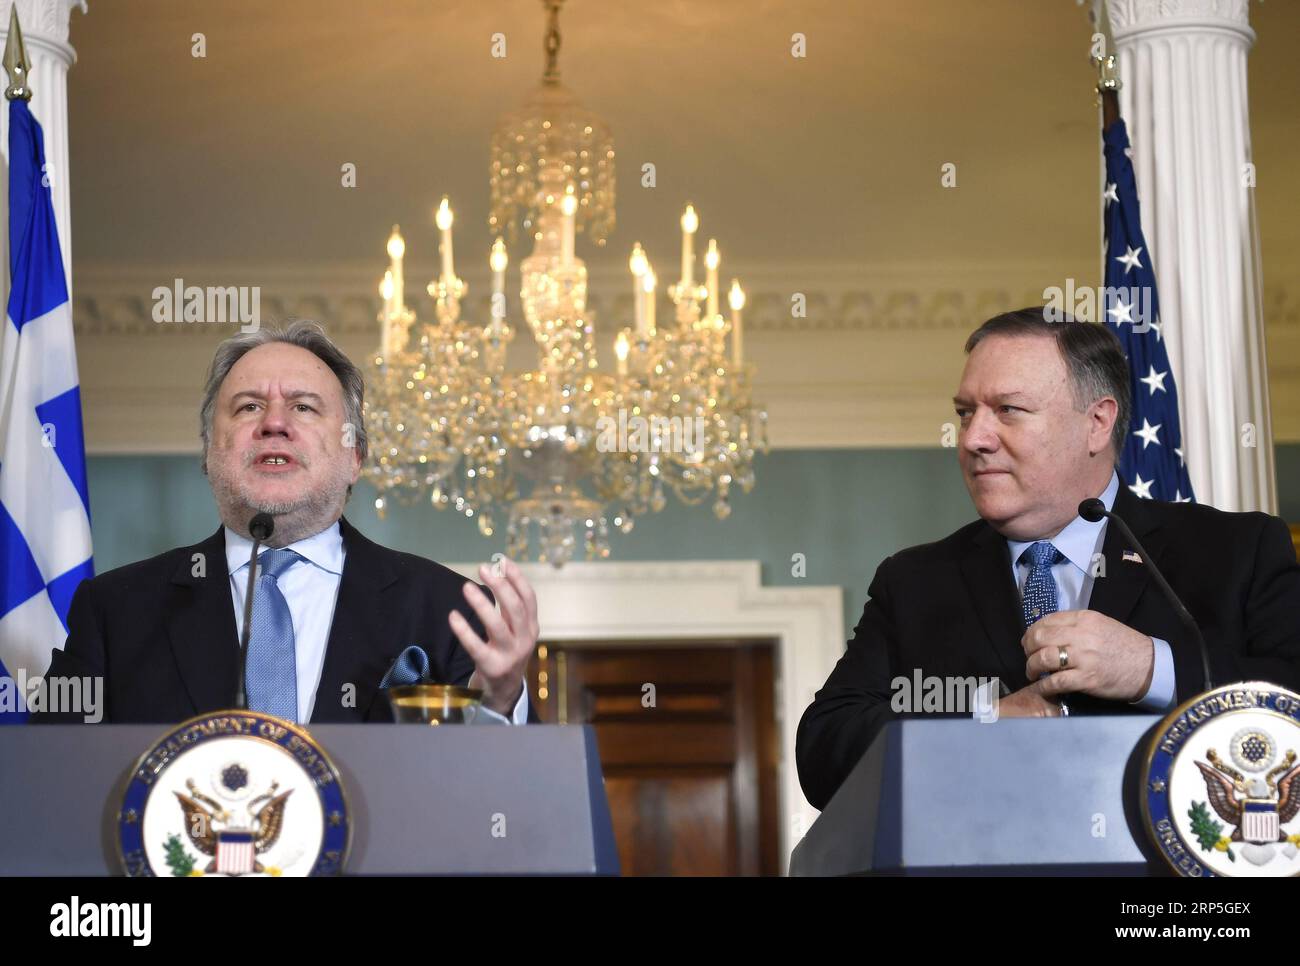 (181214) -- WASHINGTON, Dec. 14, 2018 -- U.S. Secretary of State Mike Pompeo (R) and Greek Acting Foreign Minister George Katrougalos hold a joint press conference at the State Department in Washington D.C., the United States, on Dec. 13, 2018. In an apparent effort to hit Russia s energy exports to European nations, the United States on Thursday highlighted the role of Greece in the diversification of European energy sources, and mulled further boosting its energy cooperation with Greece in a bilateral dialogue. )(yxb) US-WASHINGTON-POMPEO-GREECE-PRESS CONFERENCE LiuxJie PUBLICATIONxNOTxINxCH Stock Photo